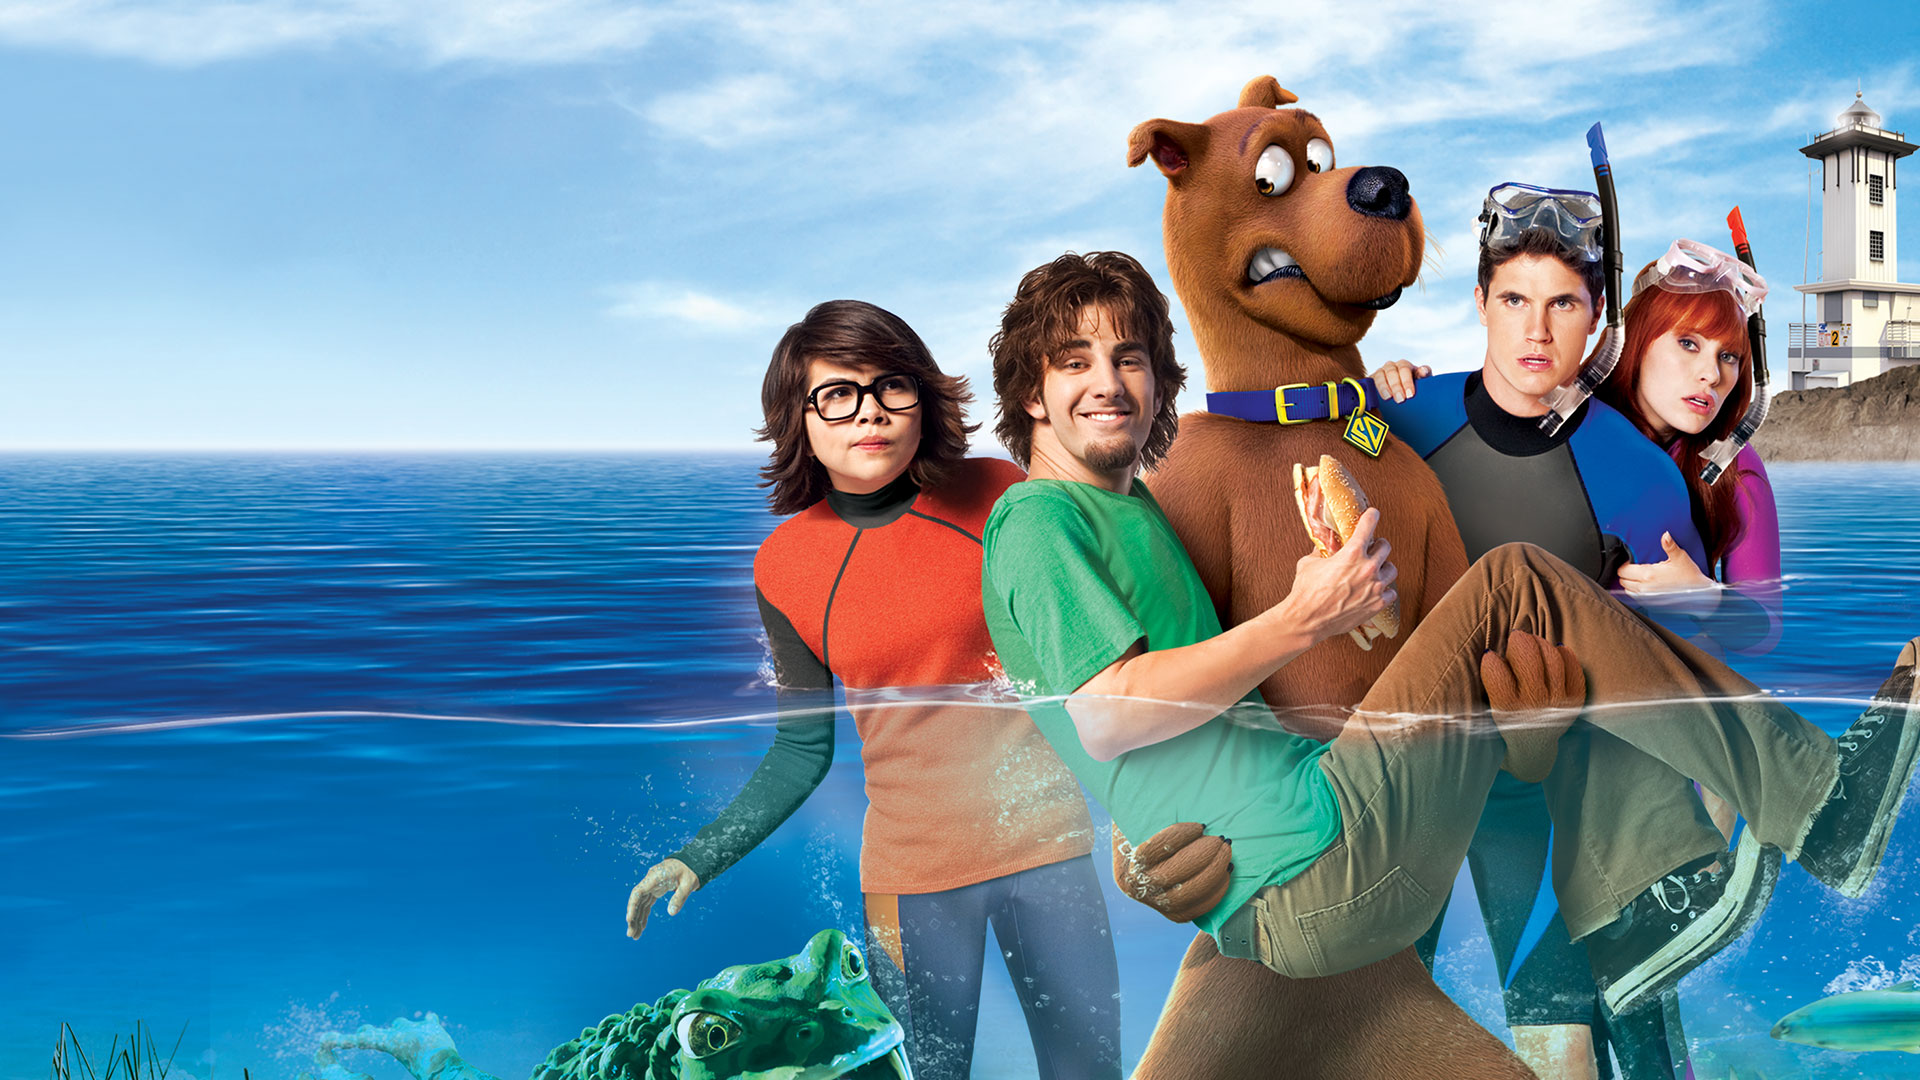 Movie Scooby-Doo! Curse of the Lake Monster HD Wallpaper | Background Image